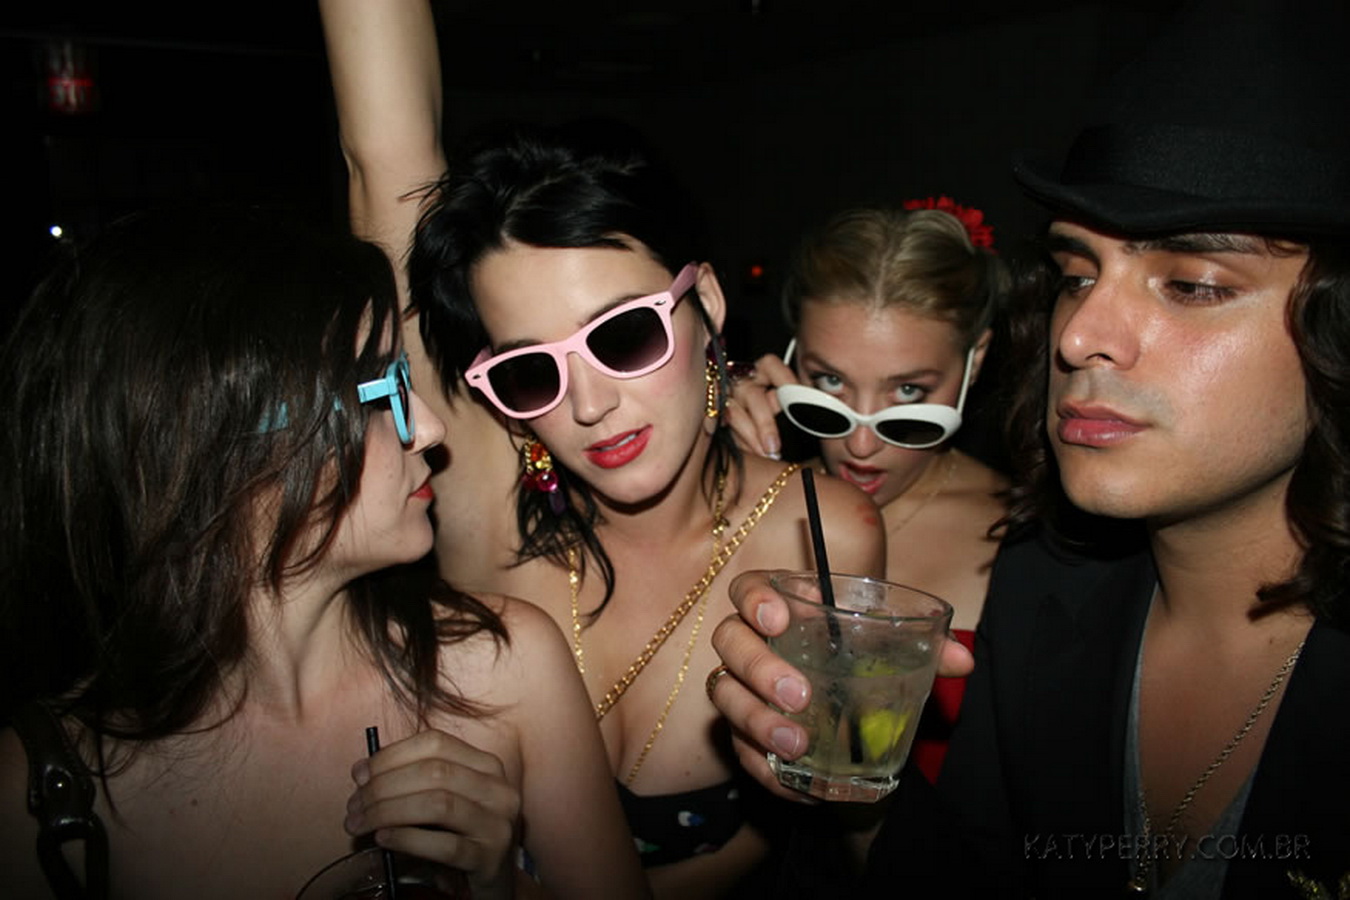 Katy_Perry_bobsslip_drunk_cleavage_downblouse_upskirt_nipslip_at_her_birthday_2007_party_99x_HQ_45.jpg